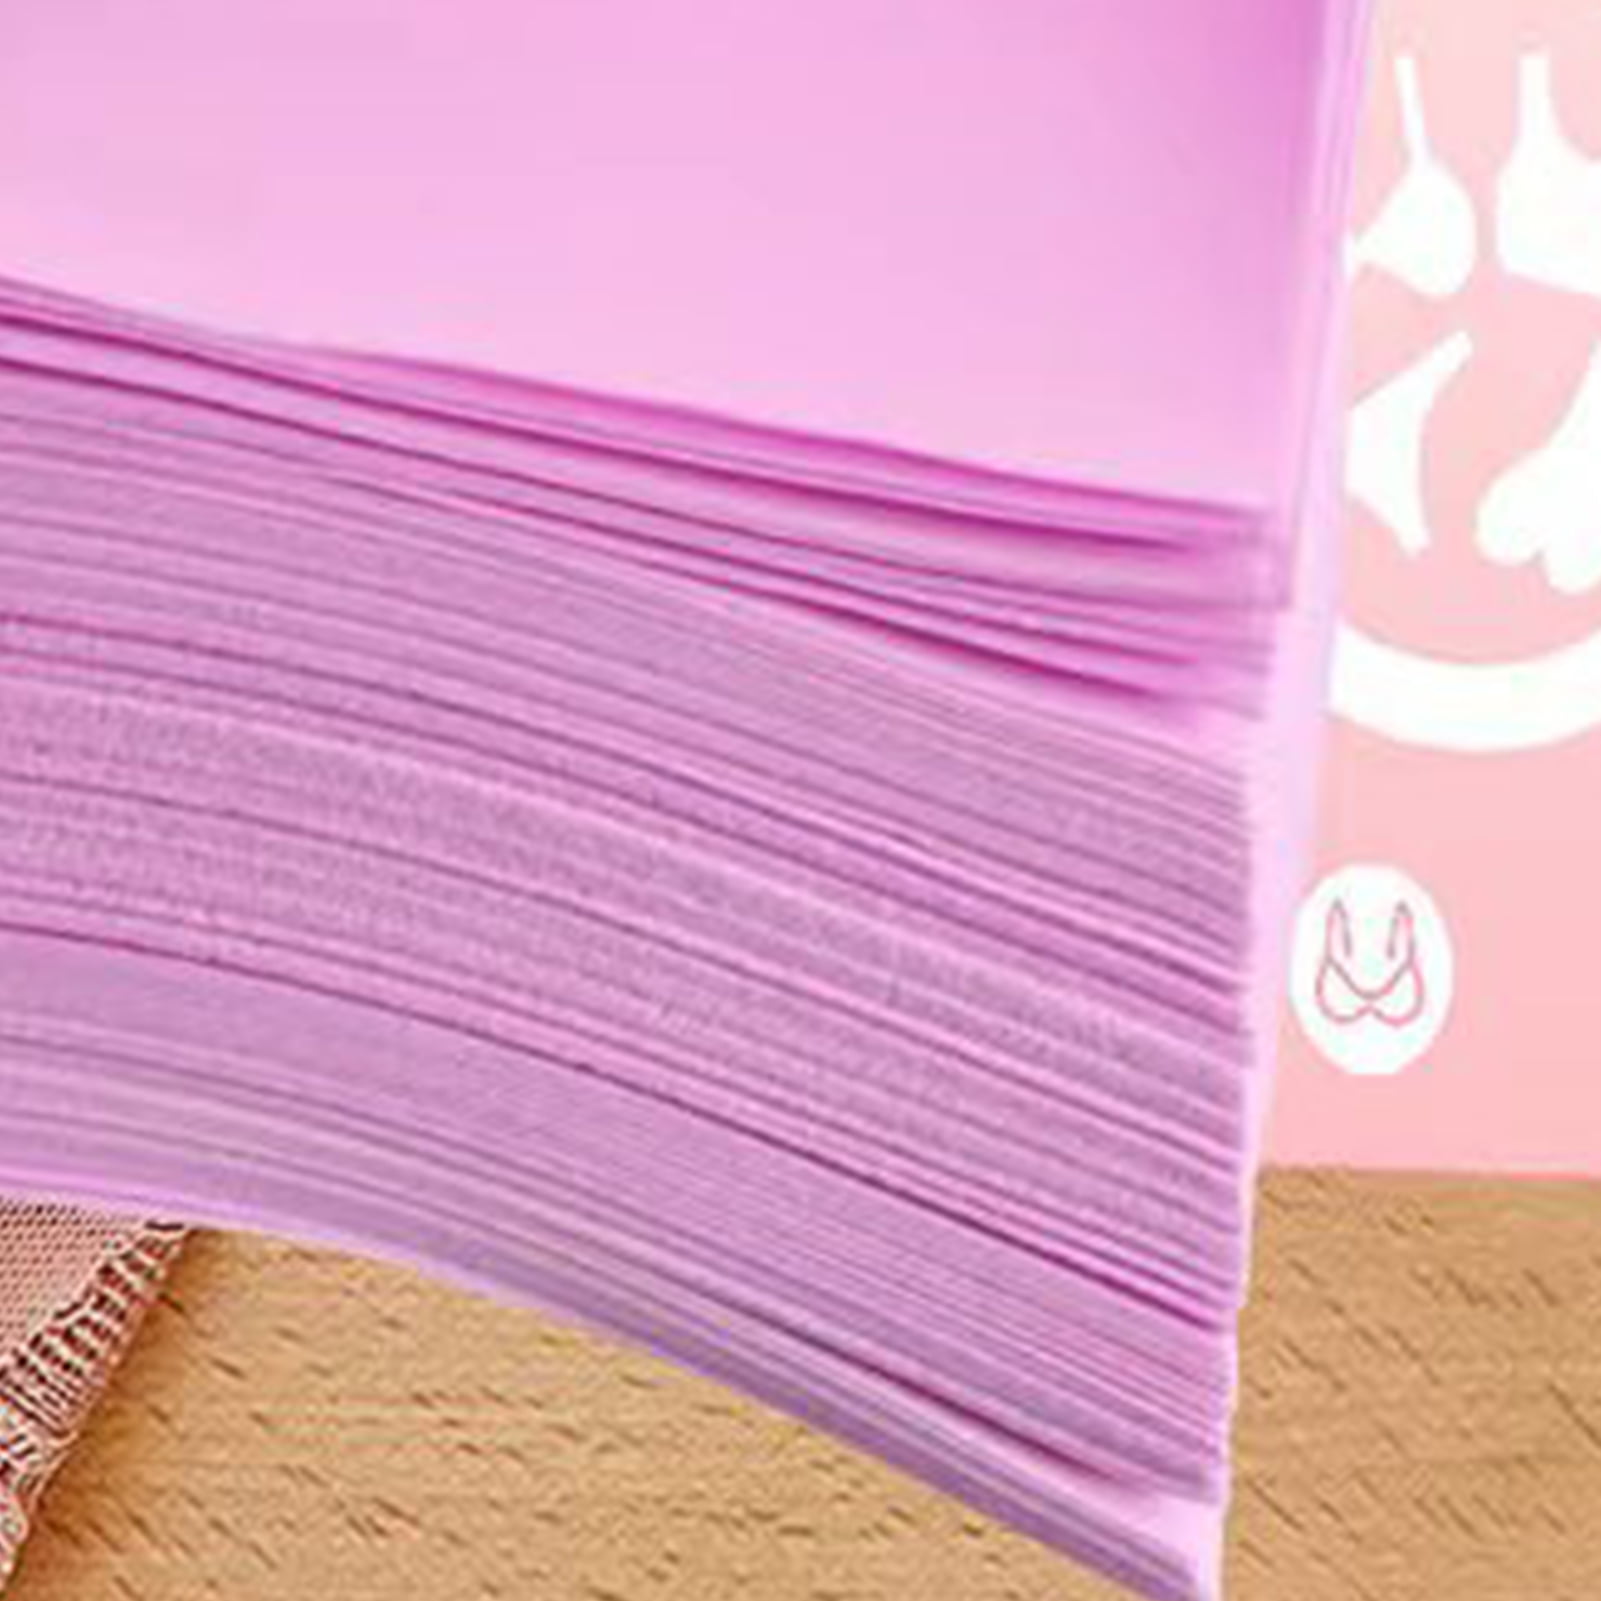 600 Sheets Laundry Detergent Sheets Bulk Laundry Sheets No Leak Laundry  Soap Sheets Anti Sensitive Liquidless Laundry Supplies Strips Scented  Washing